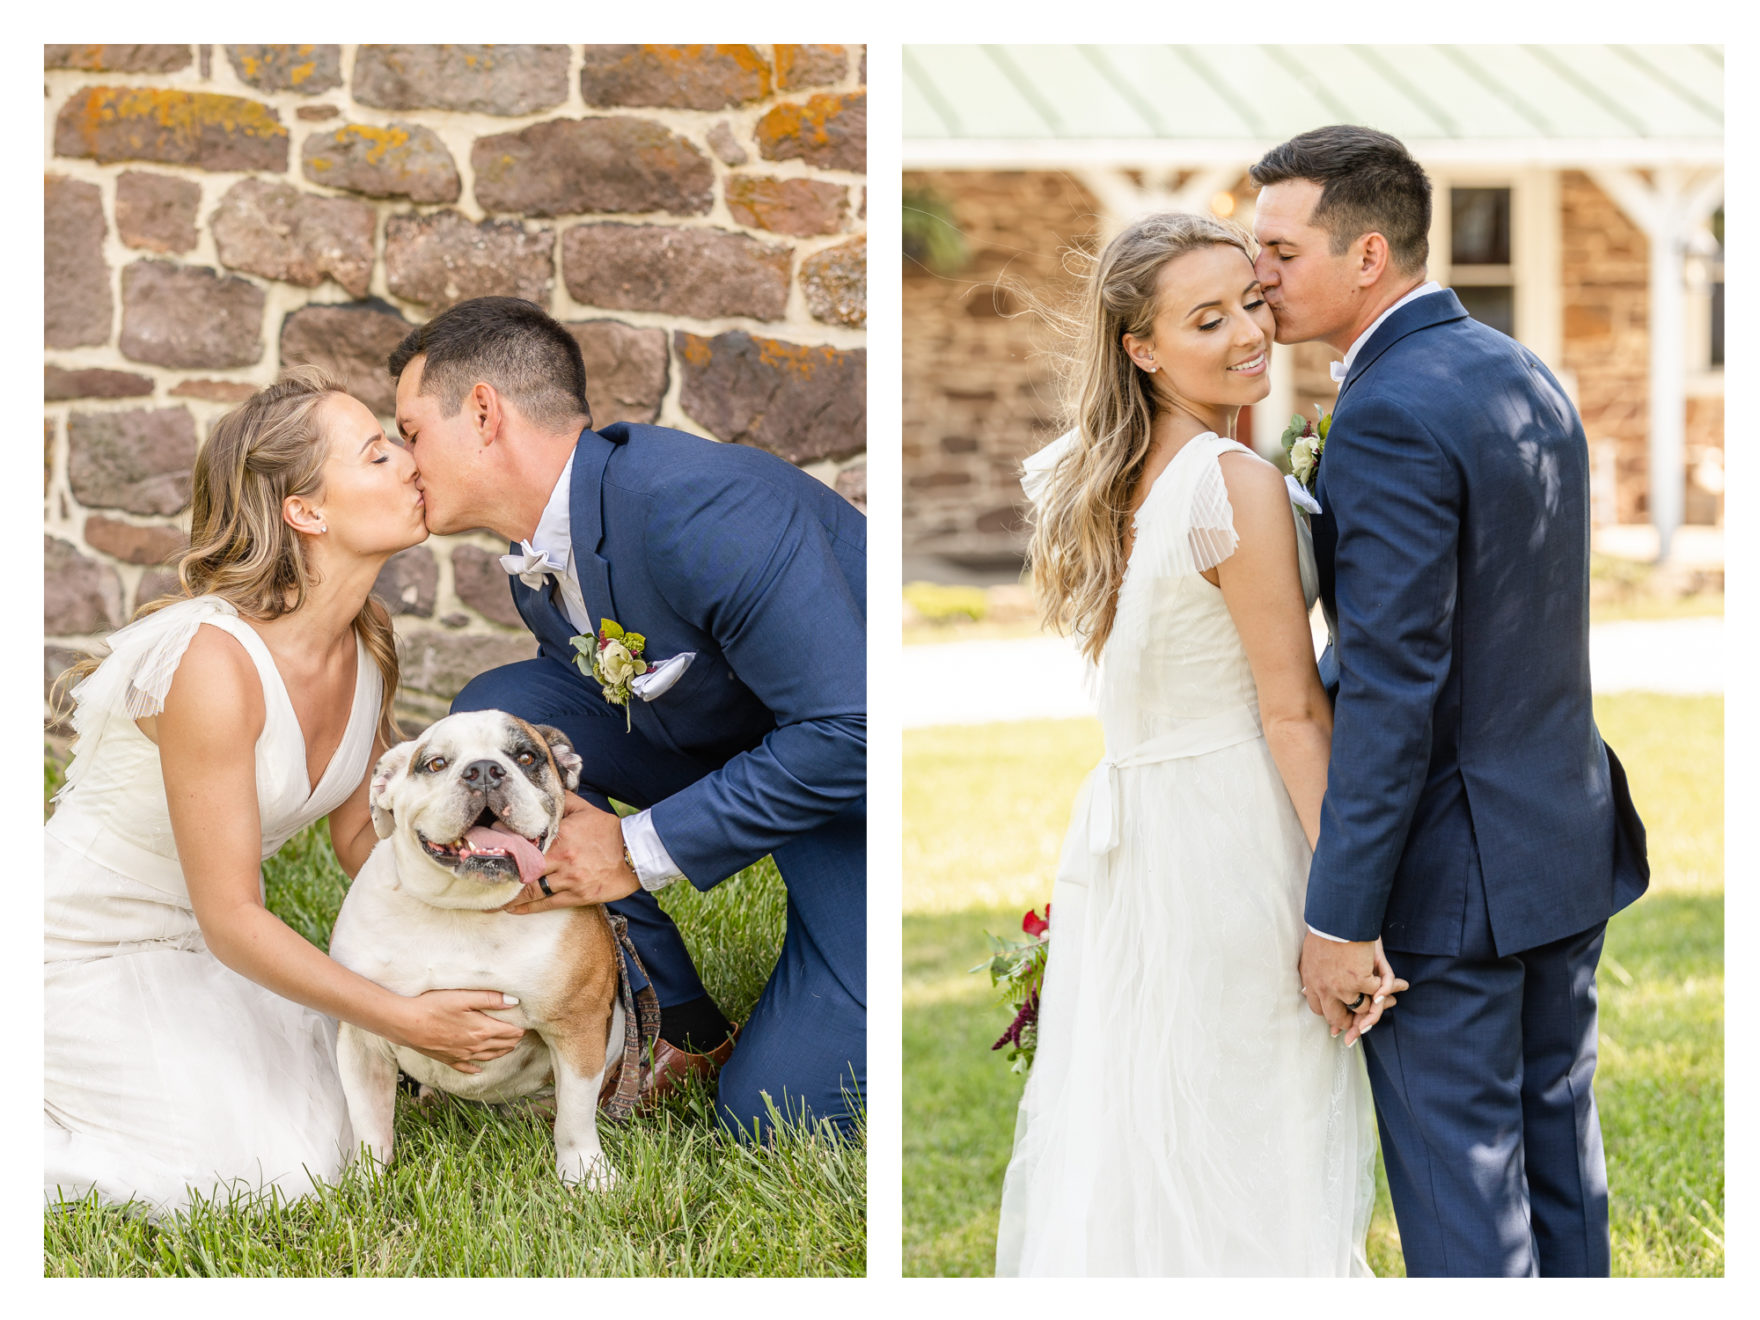 Summer wedding at a private residence farm in Westminster Carroll County Maryland. Cicadas, cows and dogs at the wedding. Pond view bride and groom with their dog